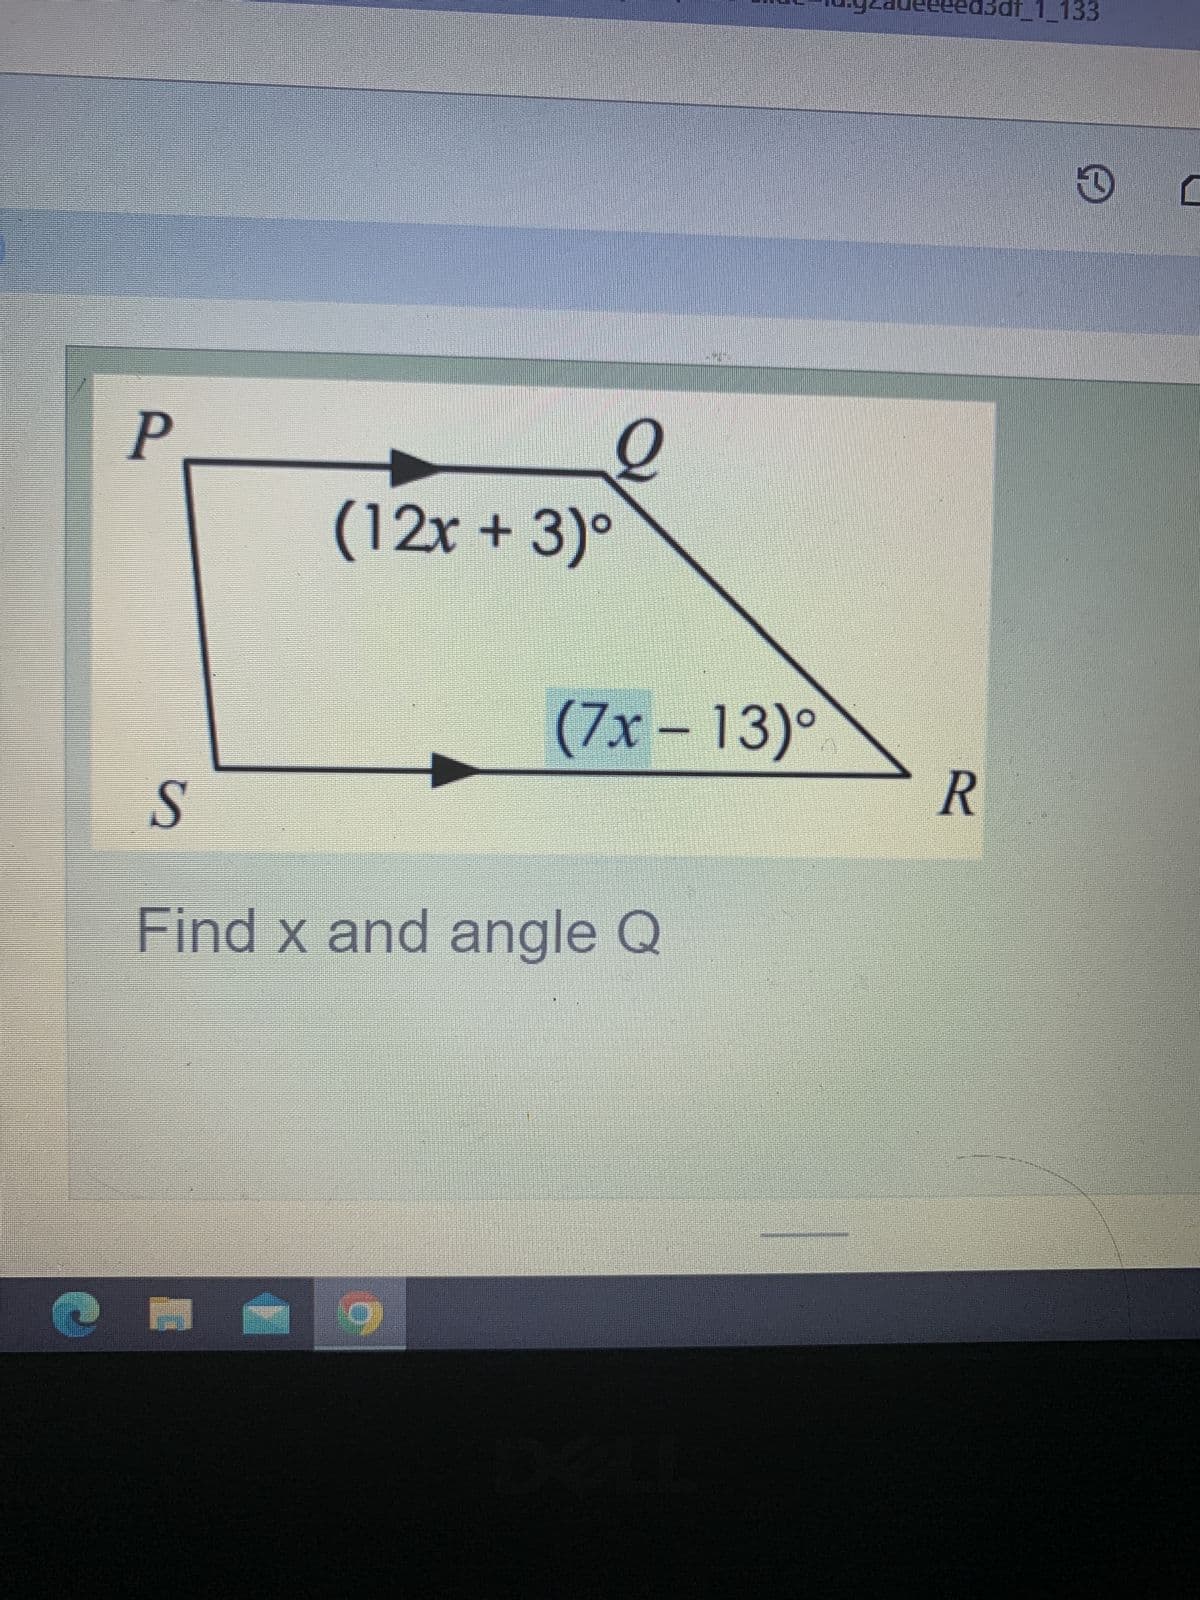 P
(12x+3)°
2
(7x-13)°
S
Find x and angle Q
R
_1_133
1